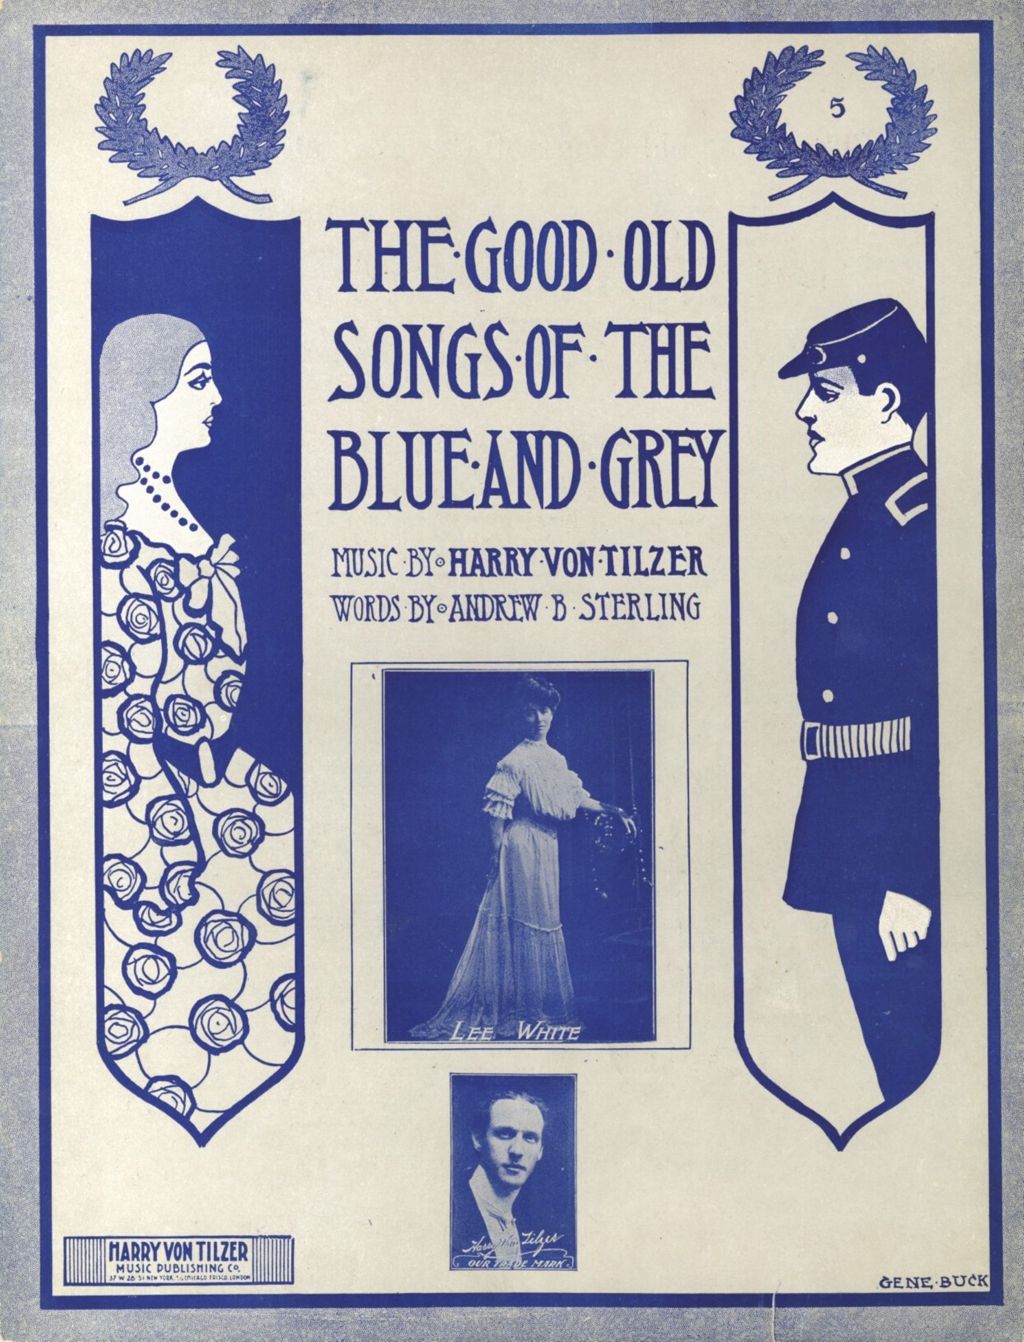 Miniature of Good Old Songs of the Blue and Grey